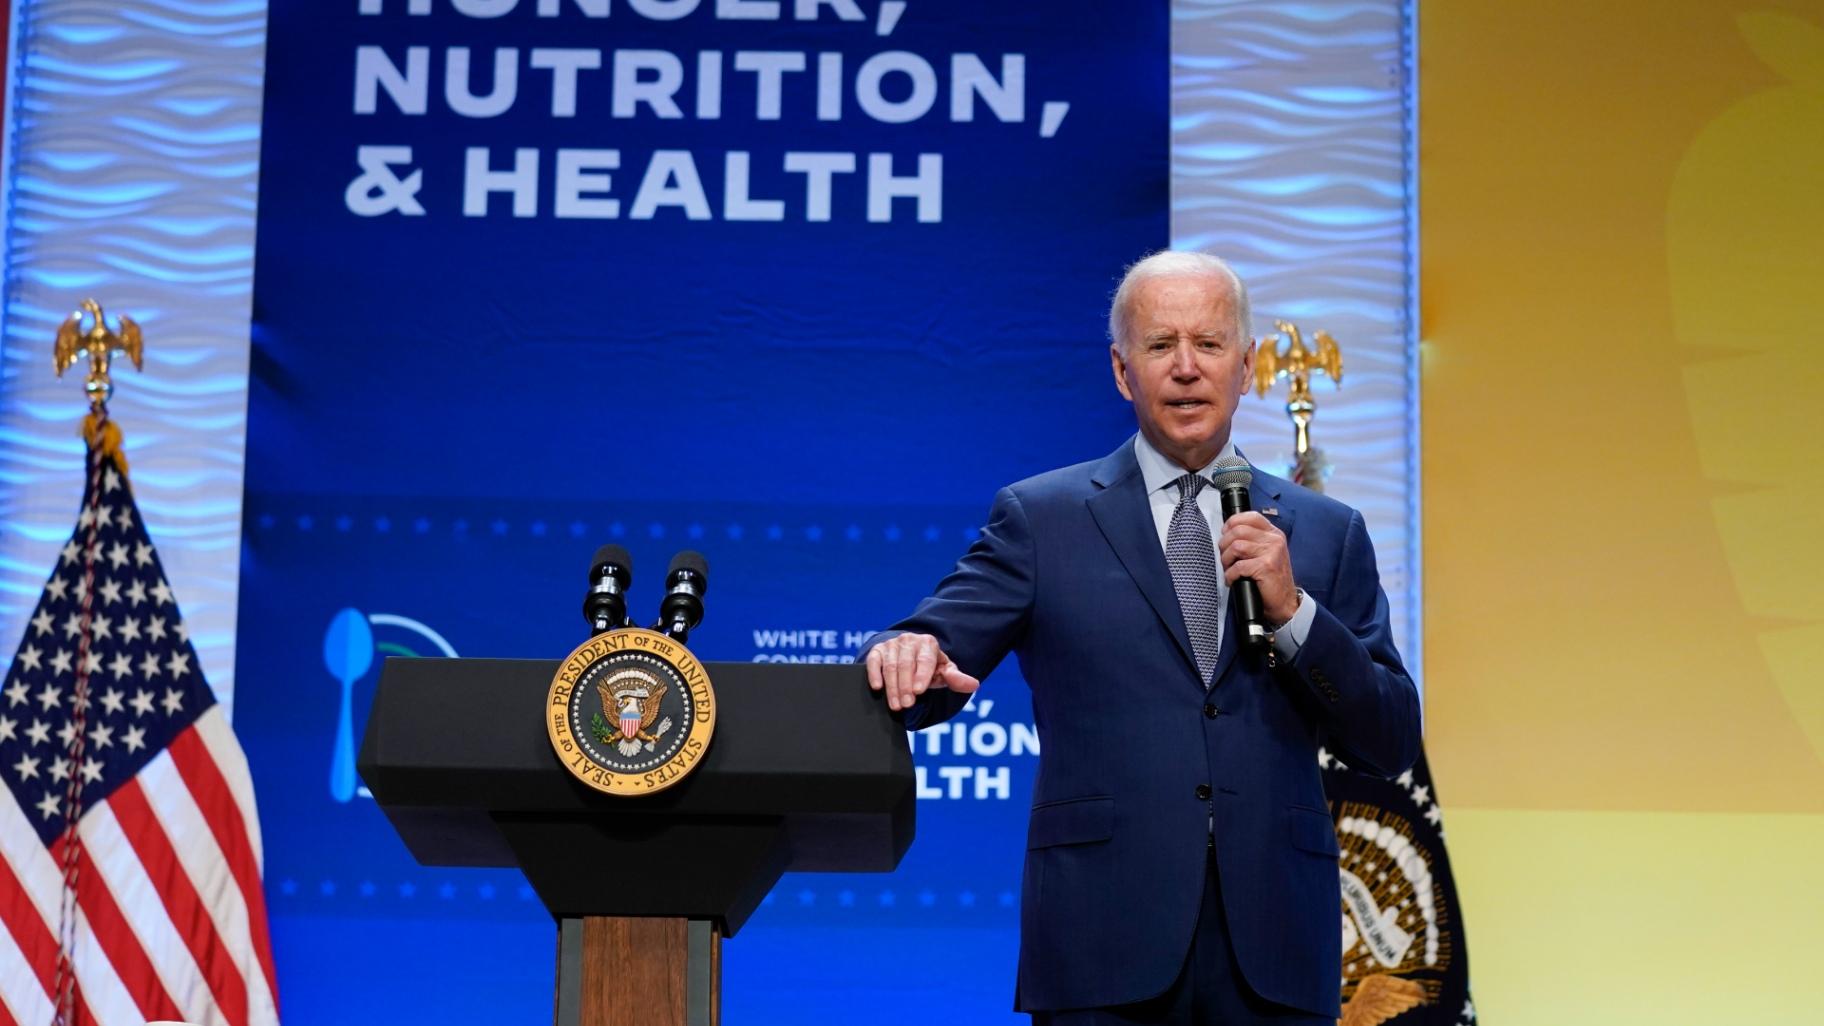 President Joe Biden speaks during the White House Conference on Hunger, Nutrition, and Health, at the Ronald Reagan Building, Wednesday, Sept. 28, 2022, in Washington. (AP Photo / Evan Vucci)